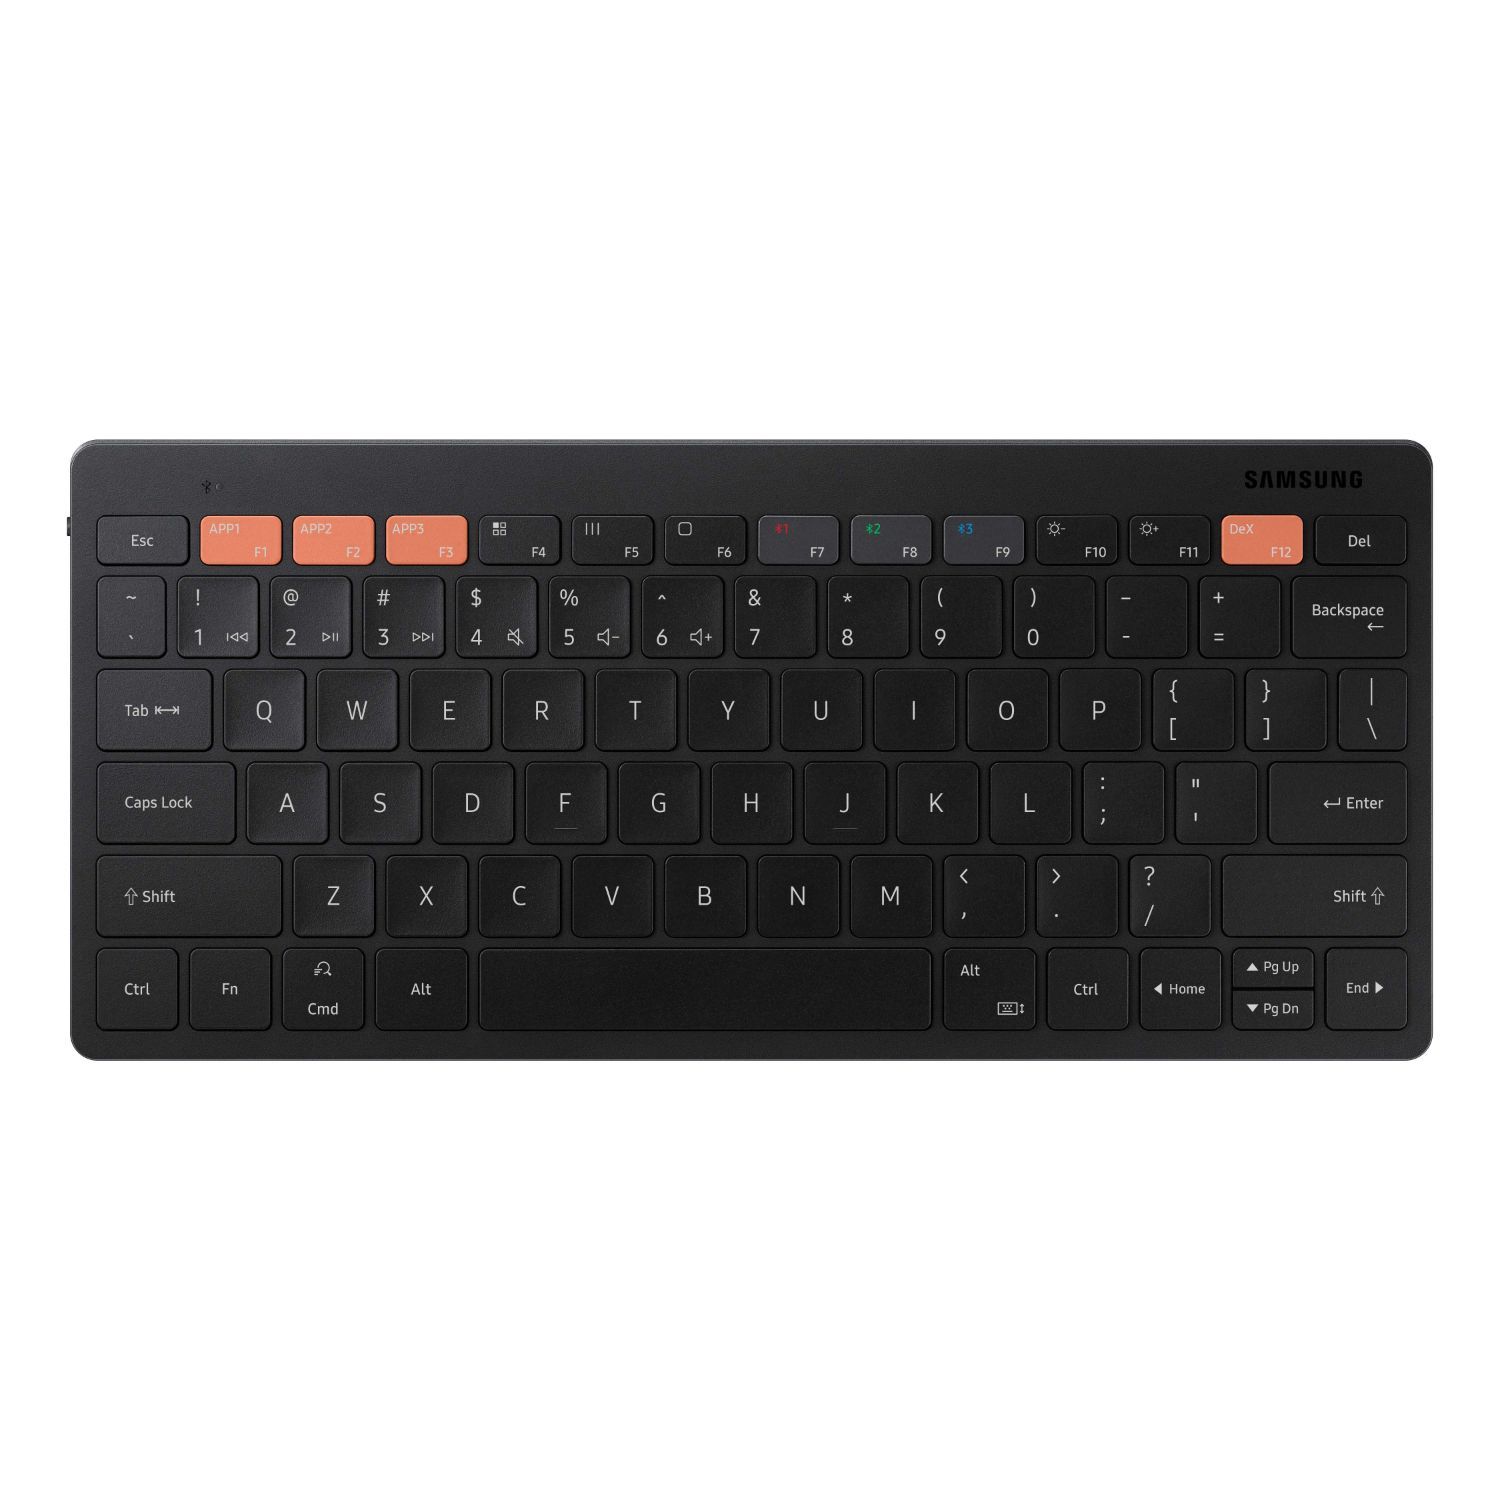 Bluetooth Keyboards for Samsung mobile devices